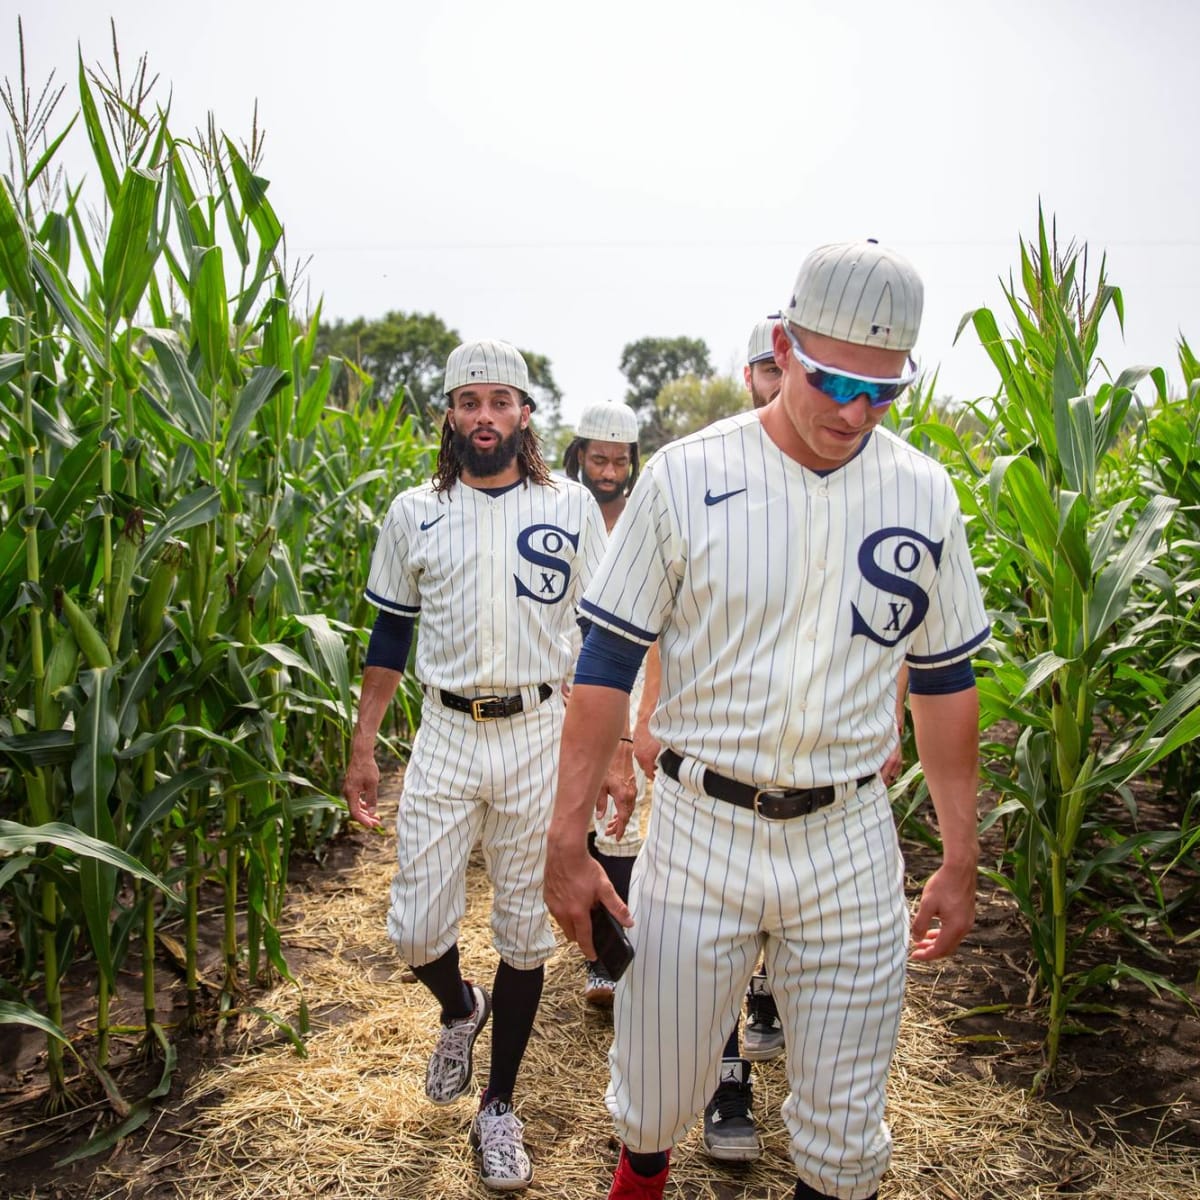 Field of Dreams uniforms: MLB reveals throwback jerseys for Cubs